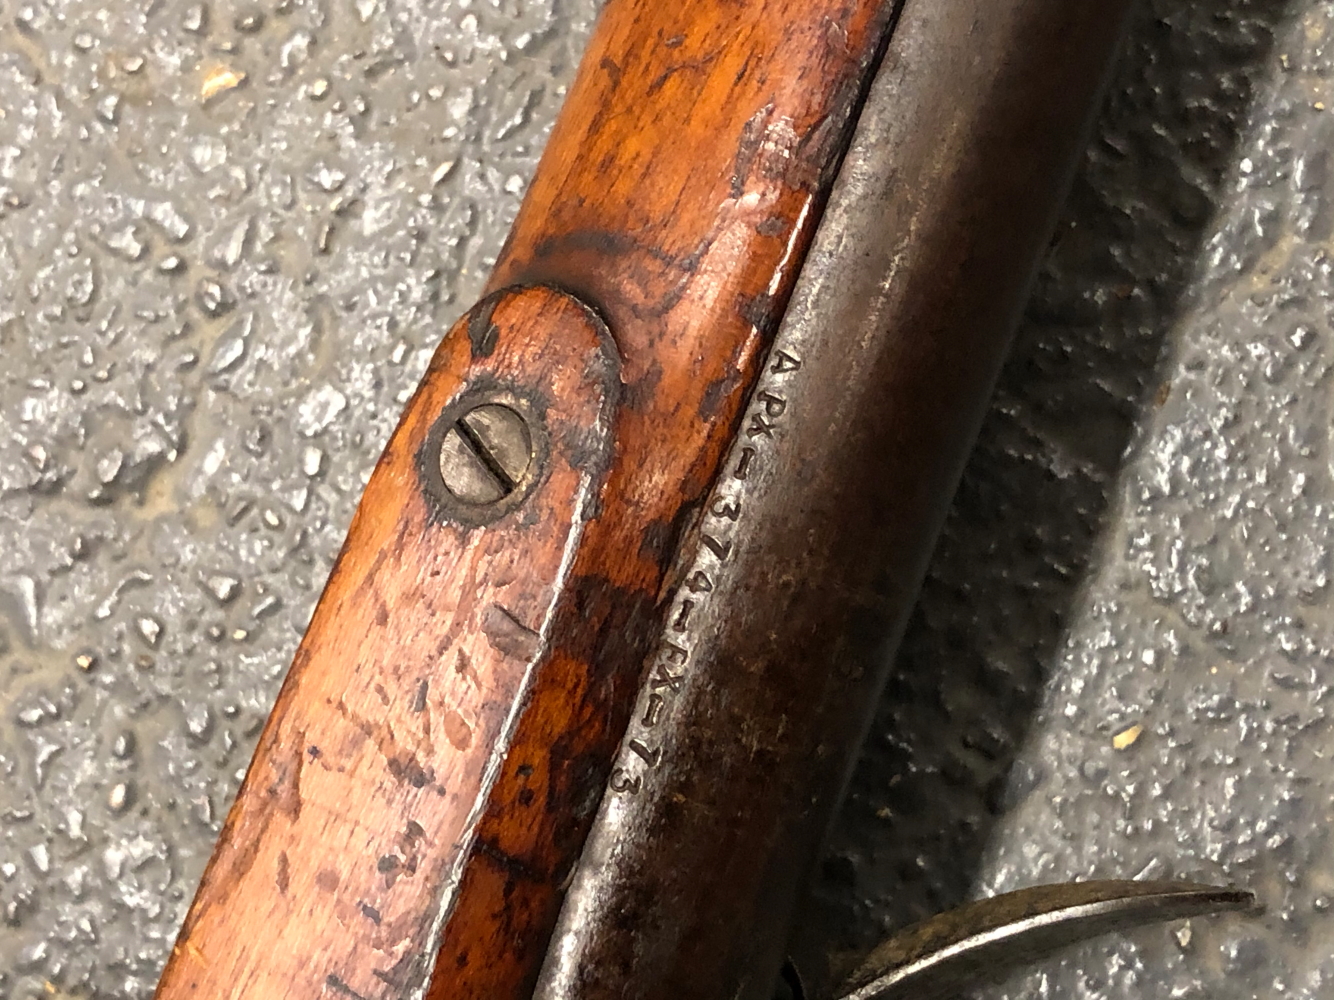 AN EAST INDIA COMPANY FLINTLOCK MUSKET, 39 INCH BARREL, BEVELLED LOCK WITH RAMPANT LION EMBLEM, FULL - Image 14 of 16